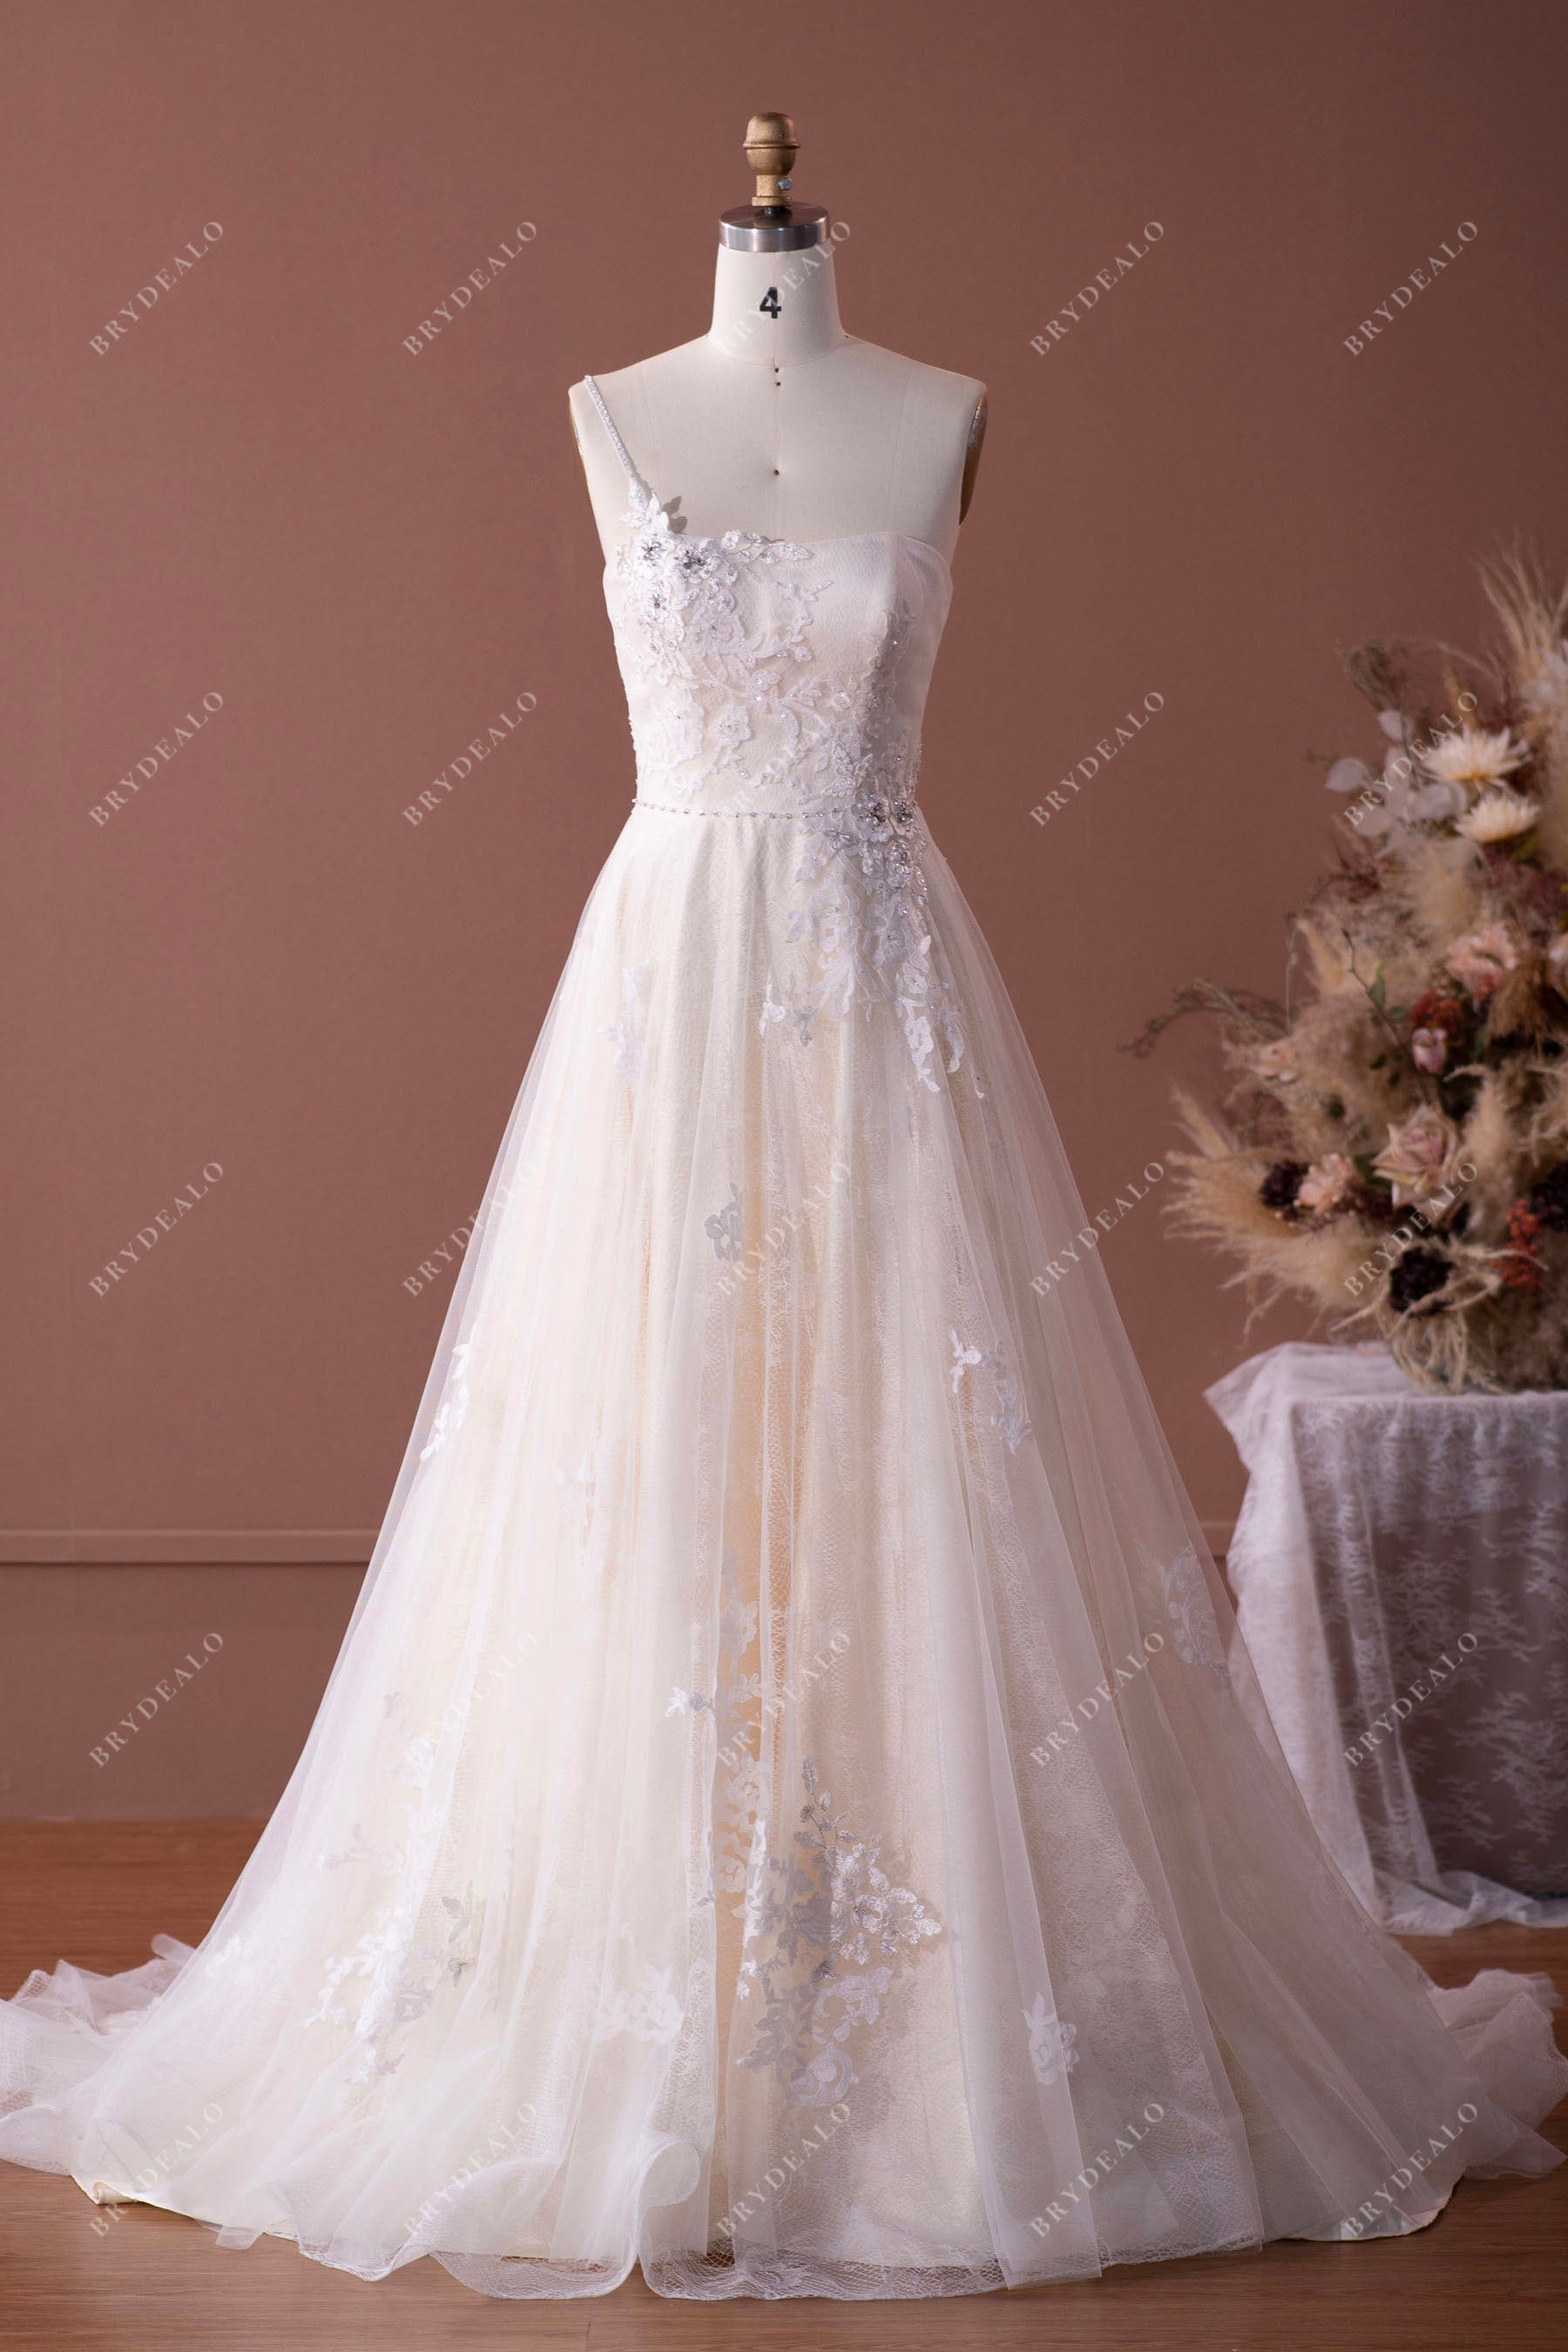 Beaded One Shoulder Lace Tulle Long A-line Wedding Dress Sample Sale